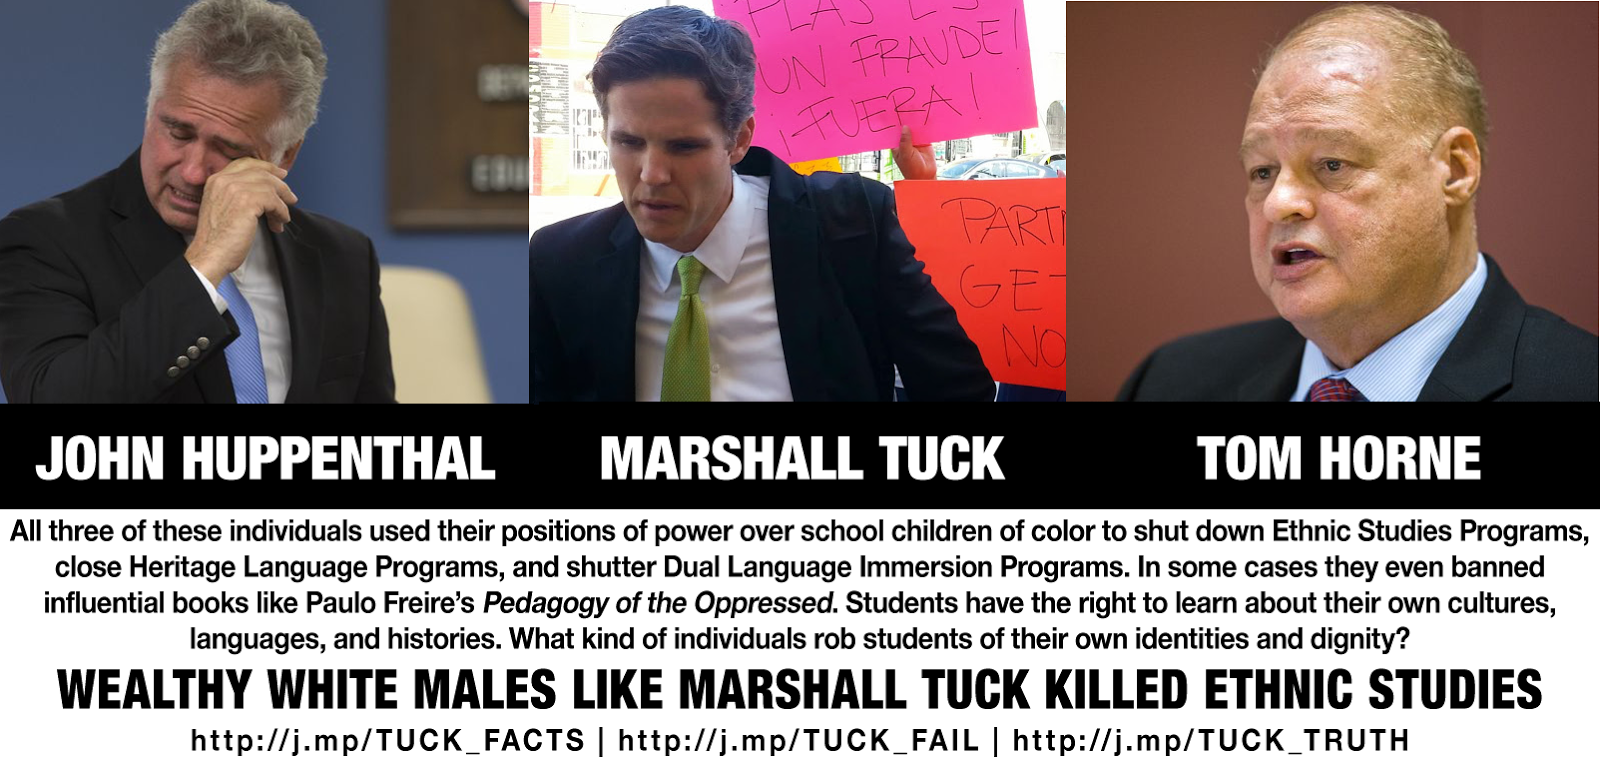 There should be no space in education for bigots like Marshall Tuck, Tom Horne, and John Huppenthal